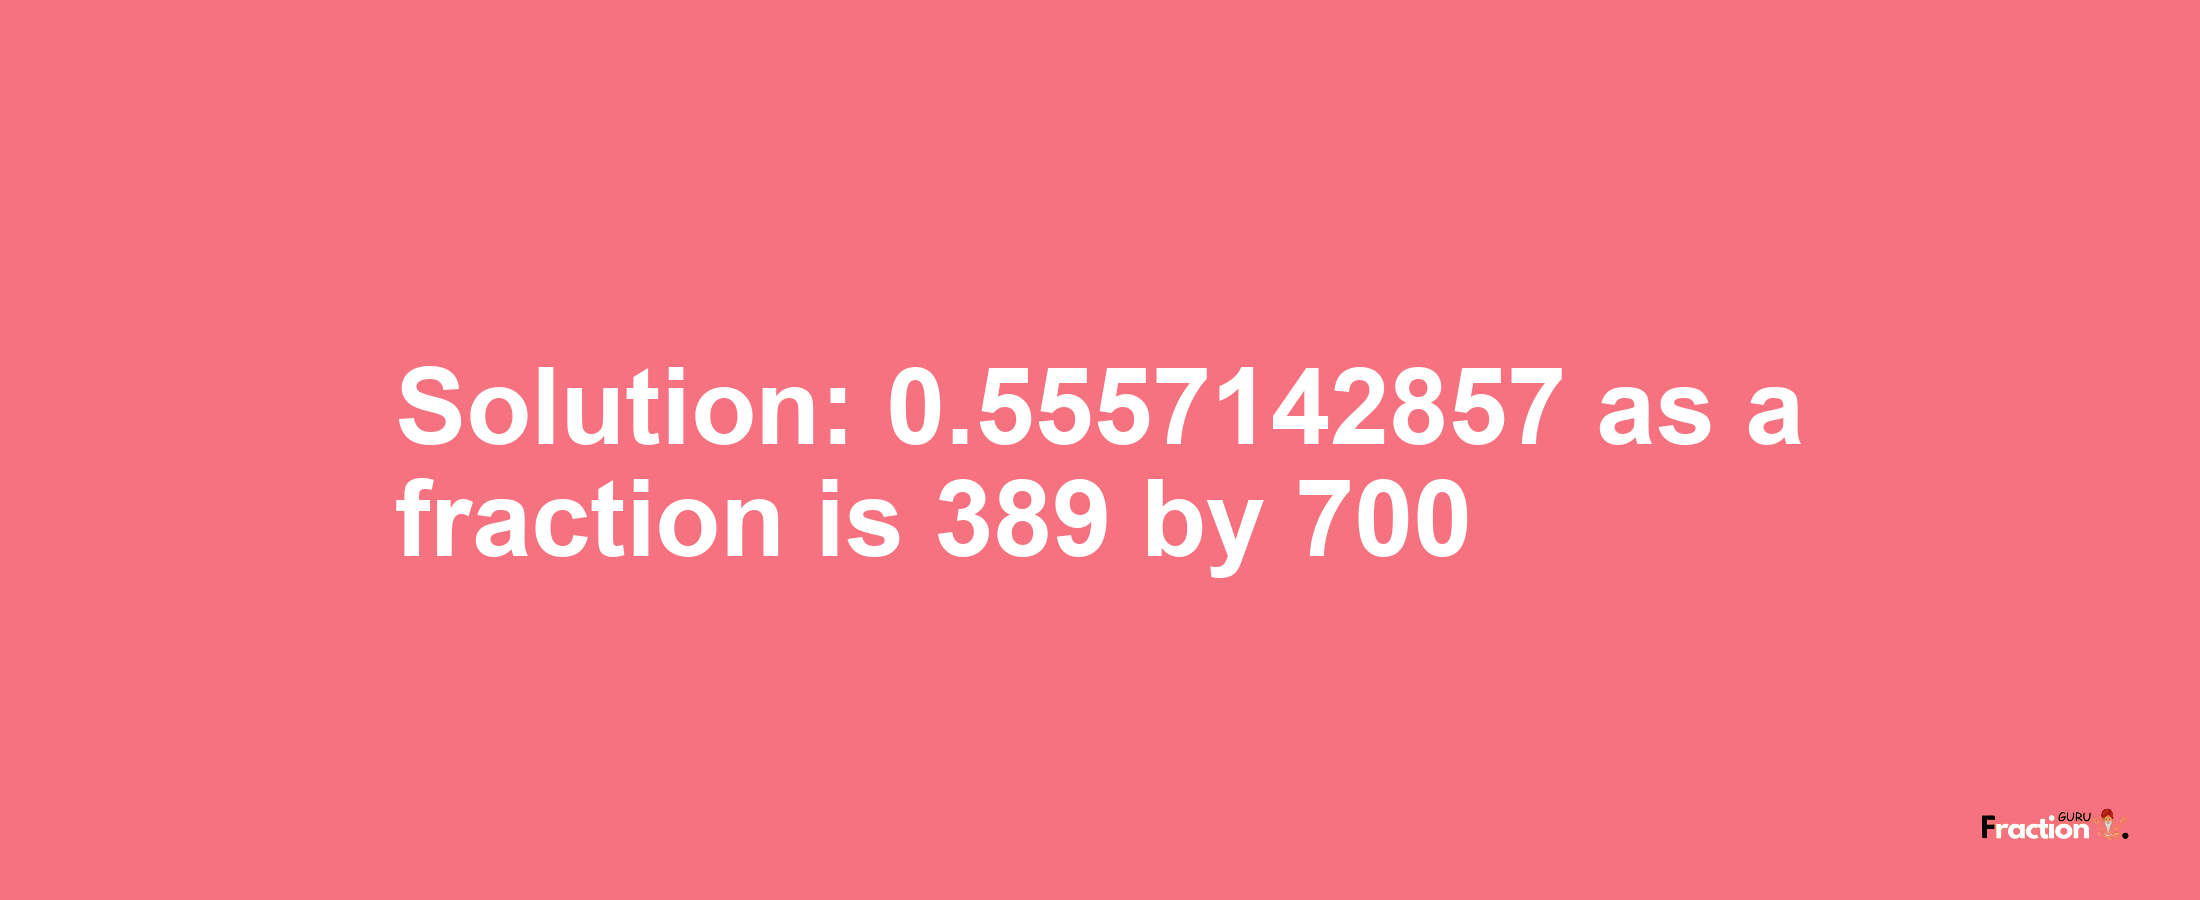 Solution:0.5557142857 as a fraction is 389/700